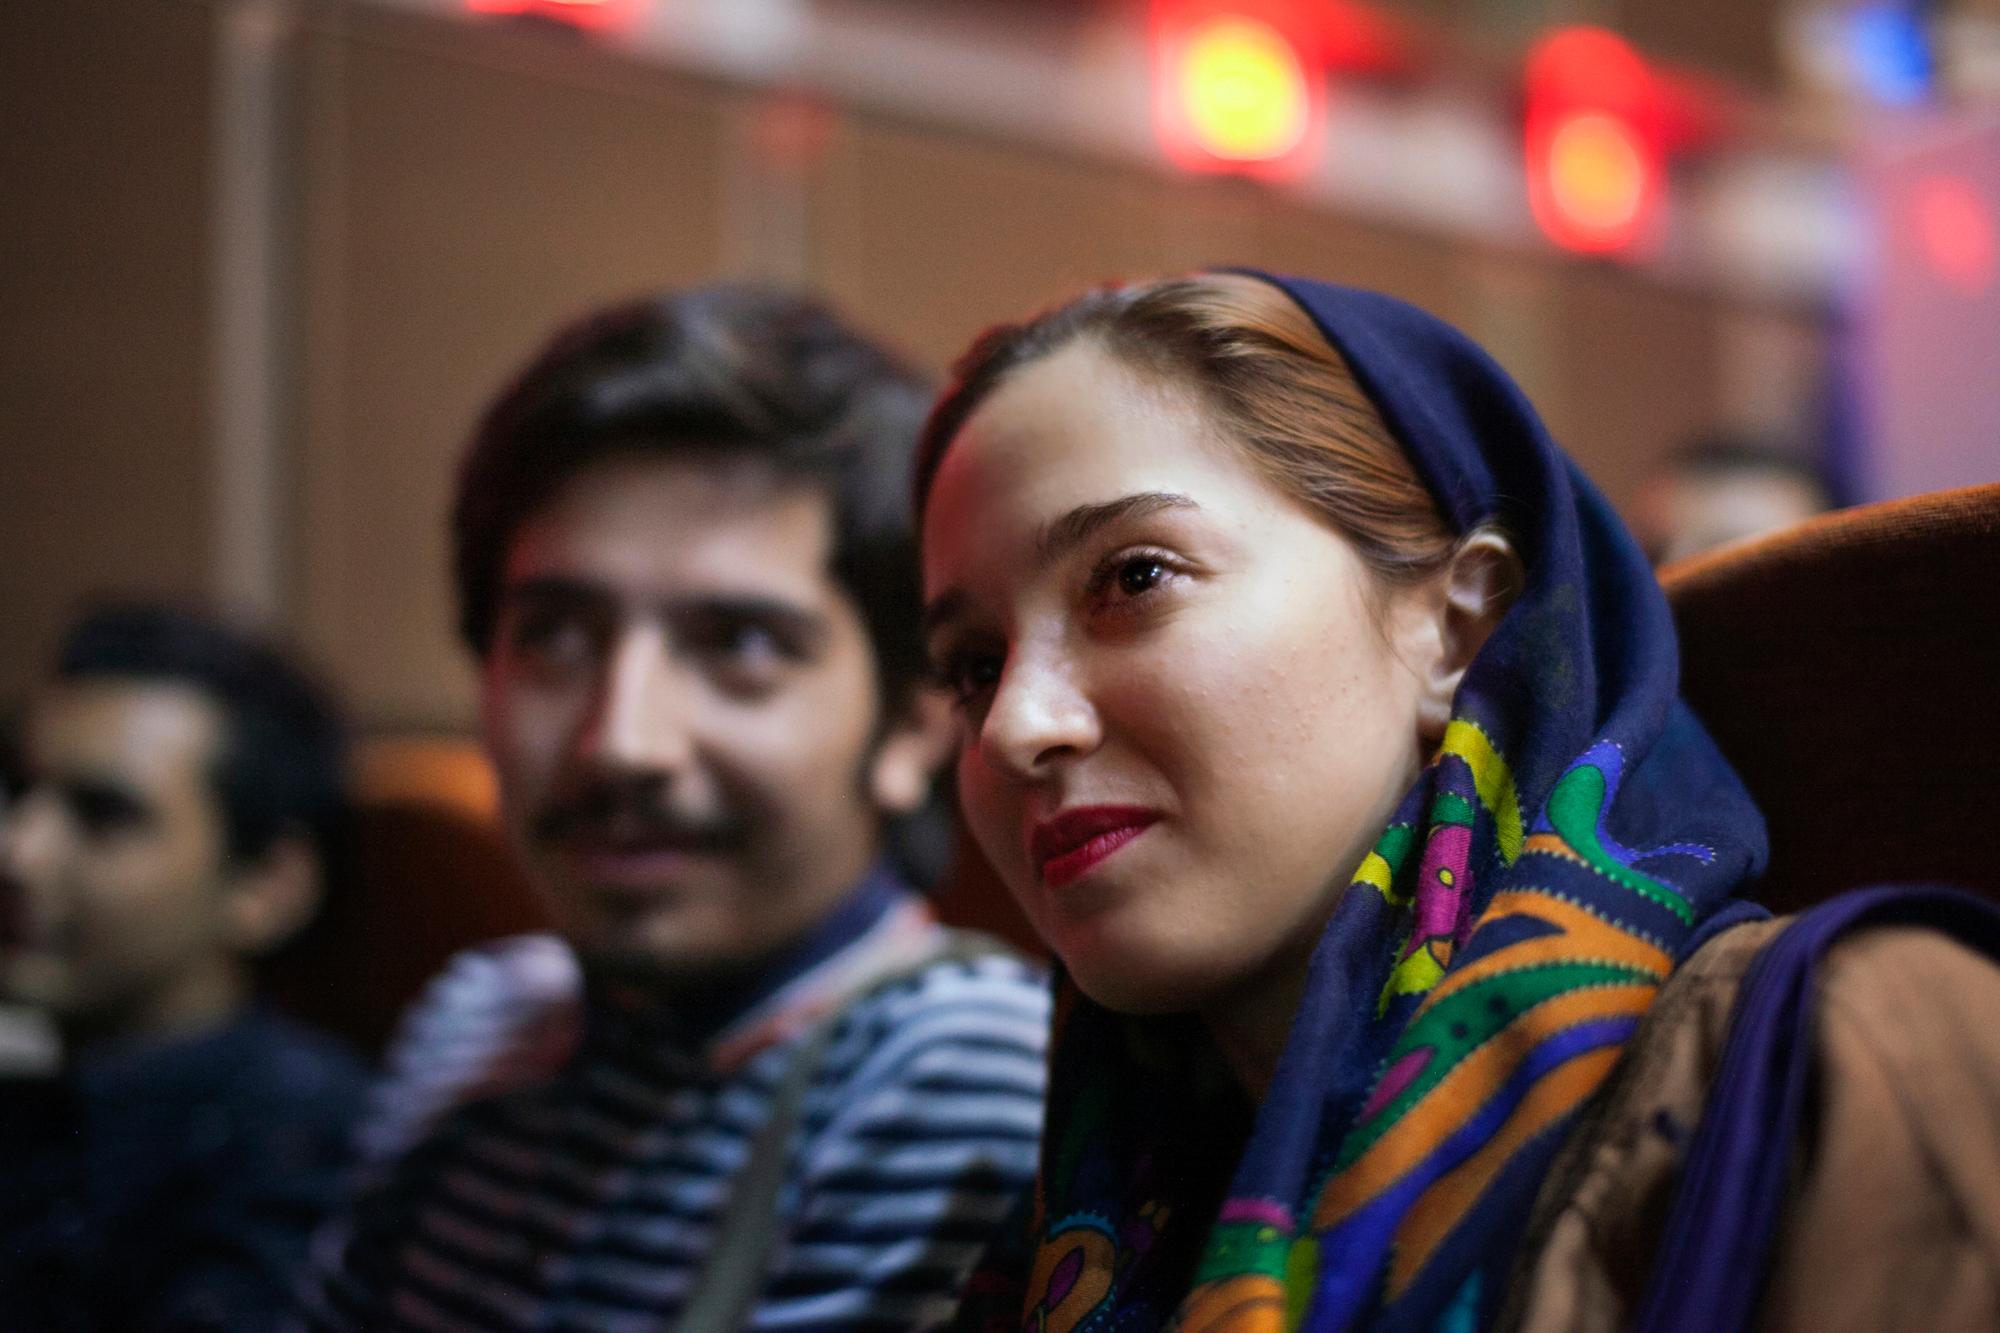 Tehran : the faces of women's empowerment - During the weekend, Mahsa spends time with her friends....